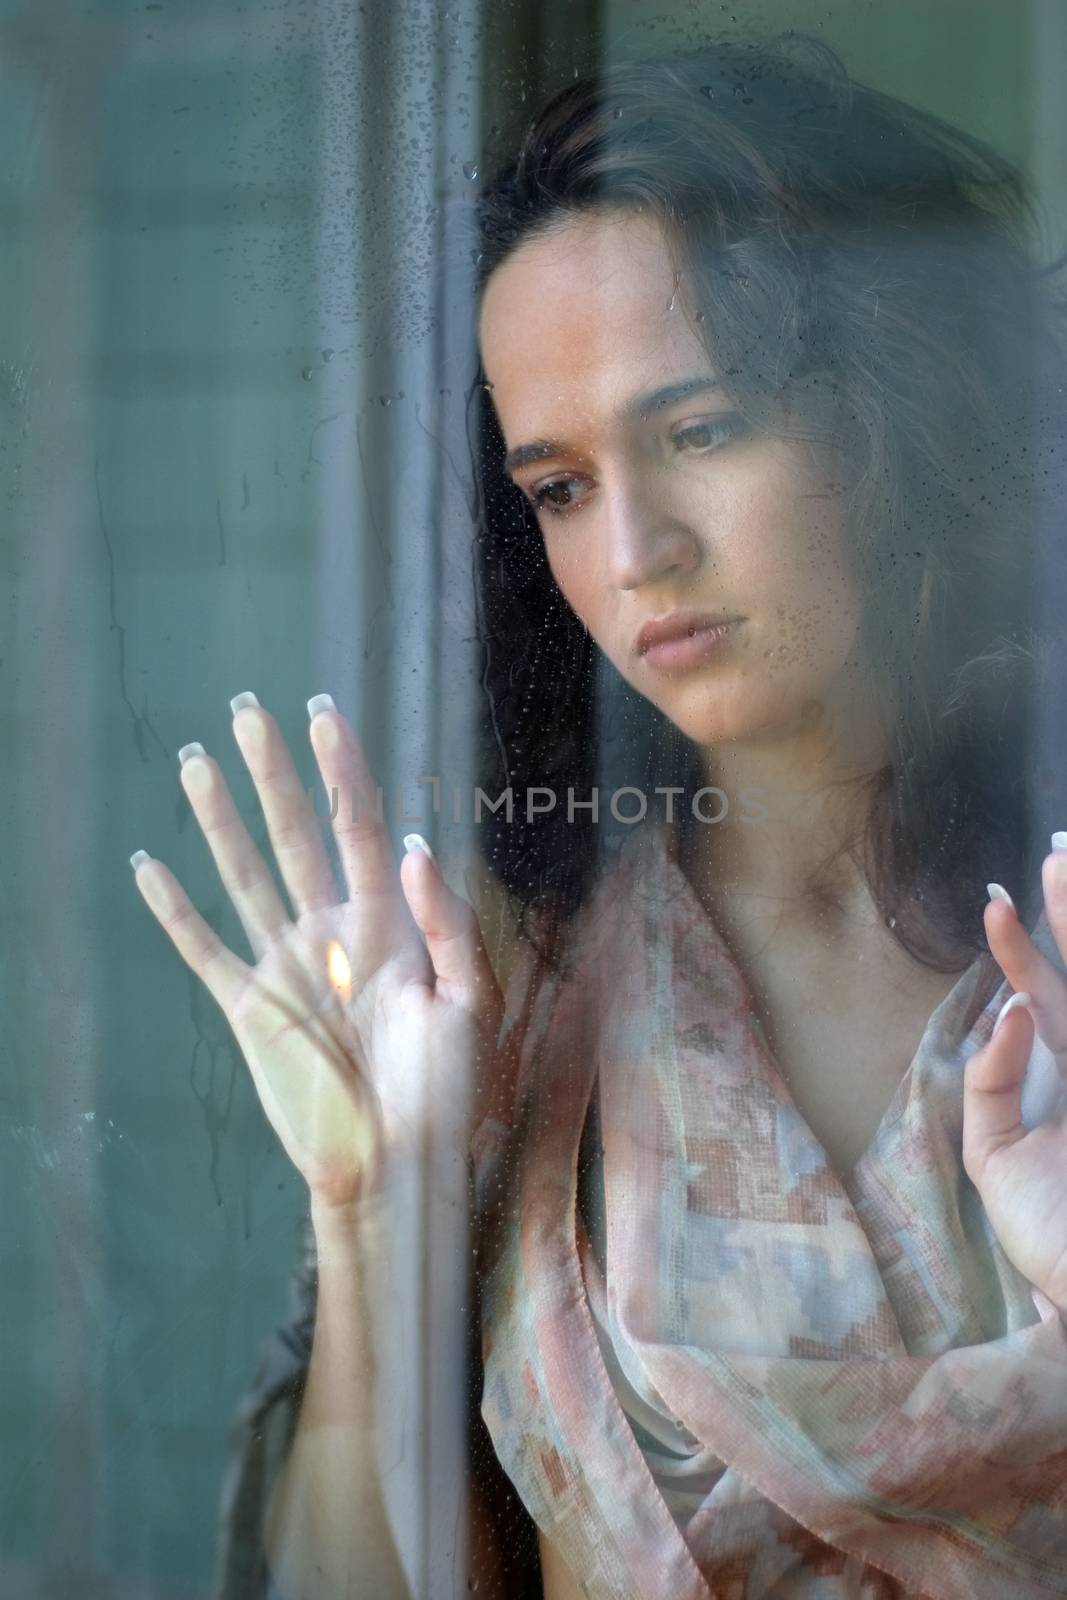 Woman with sad smile behind a wet window